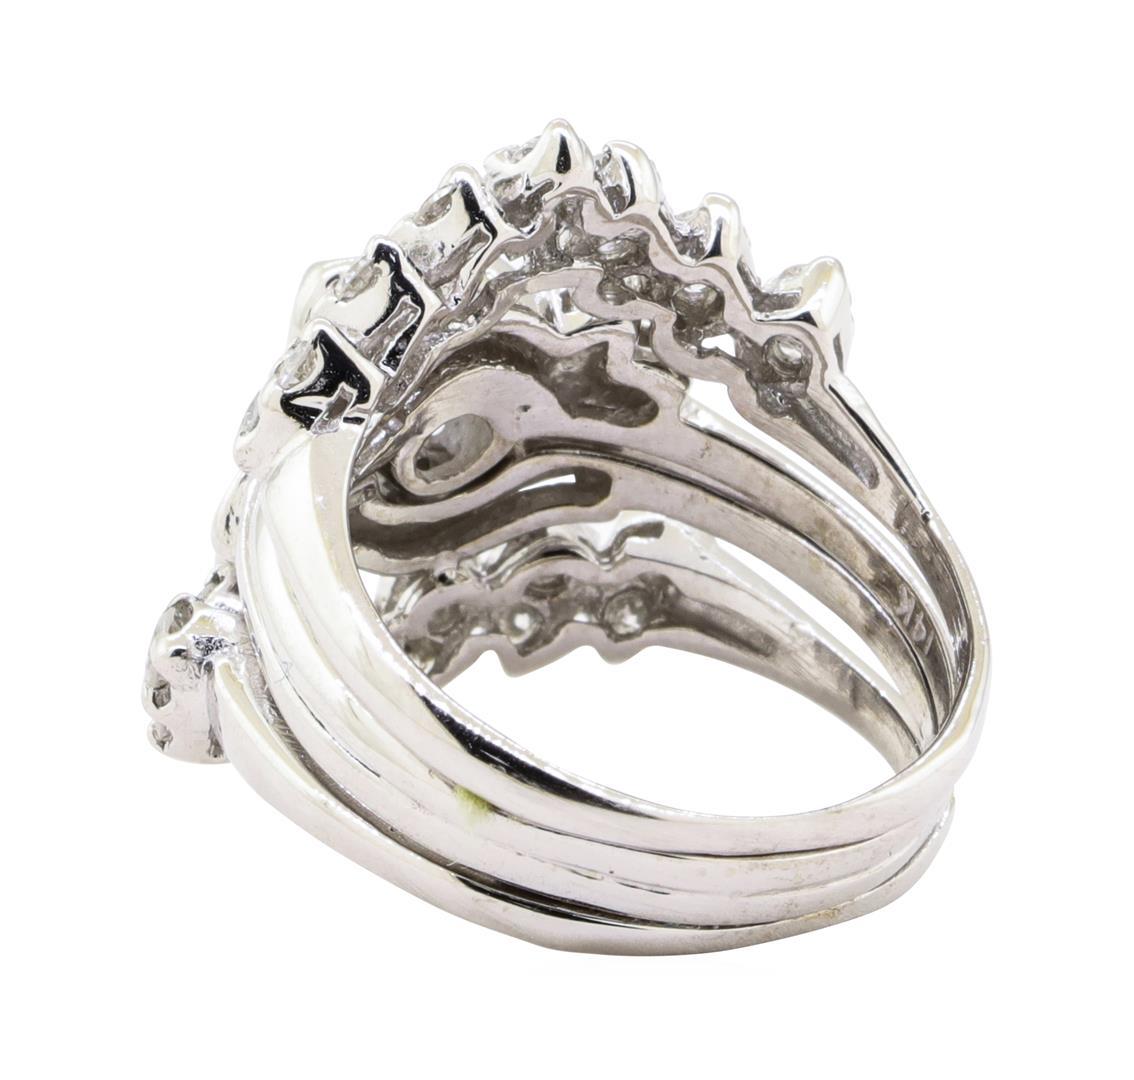 1.55 ctw Diamond Ring And Ring Guard - 14KT White Gold